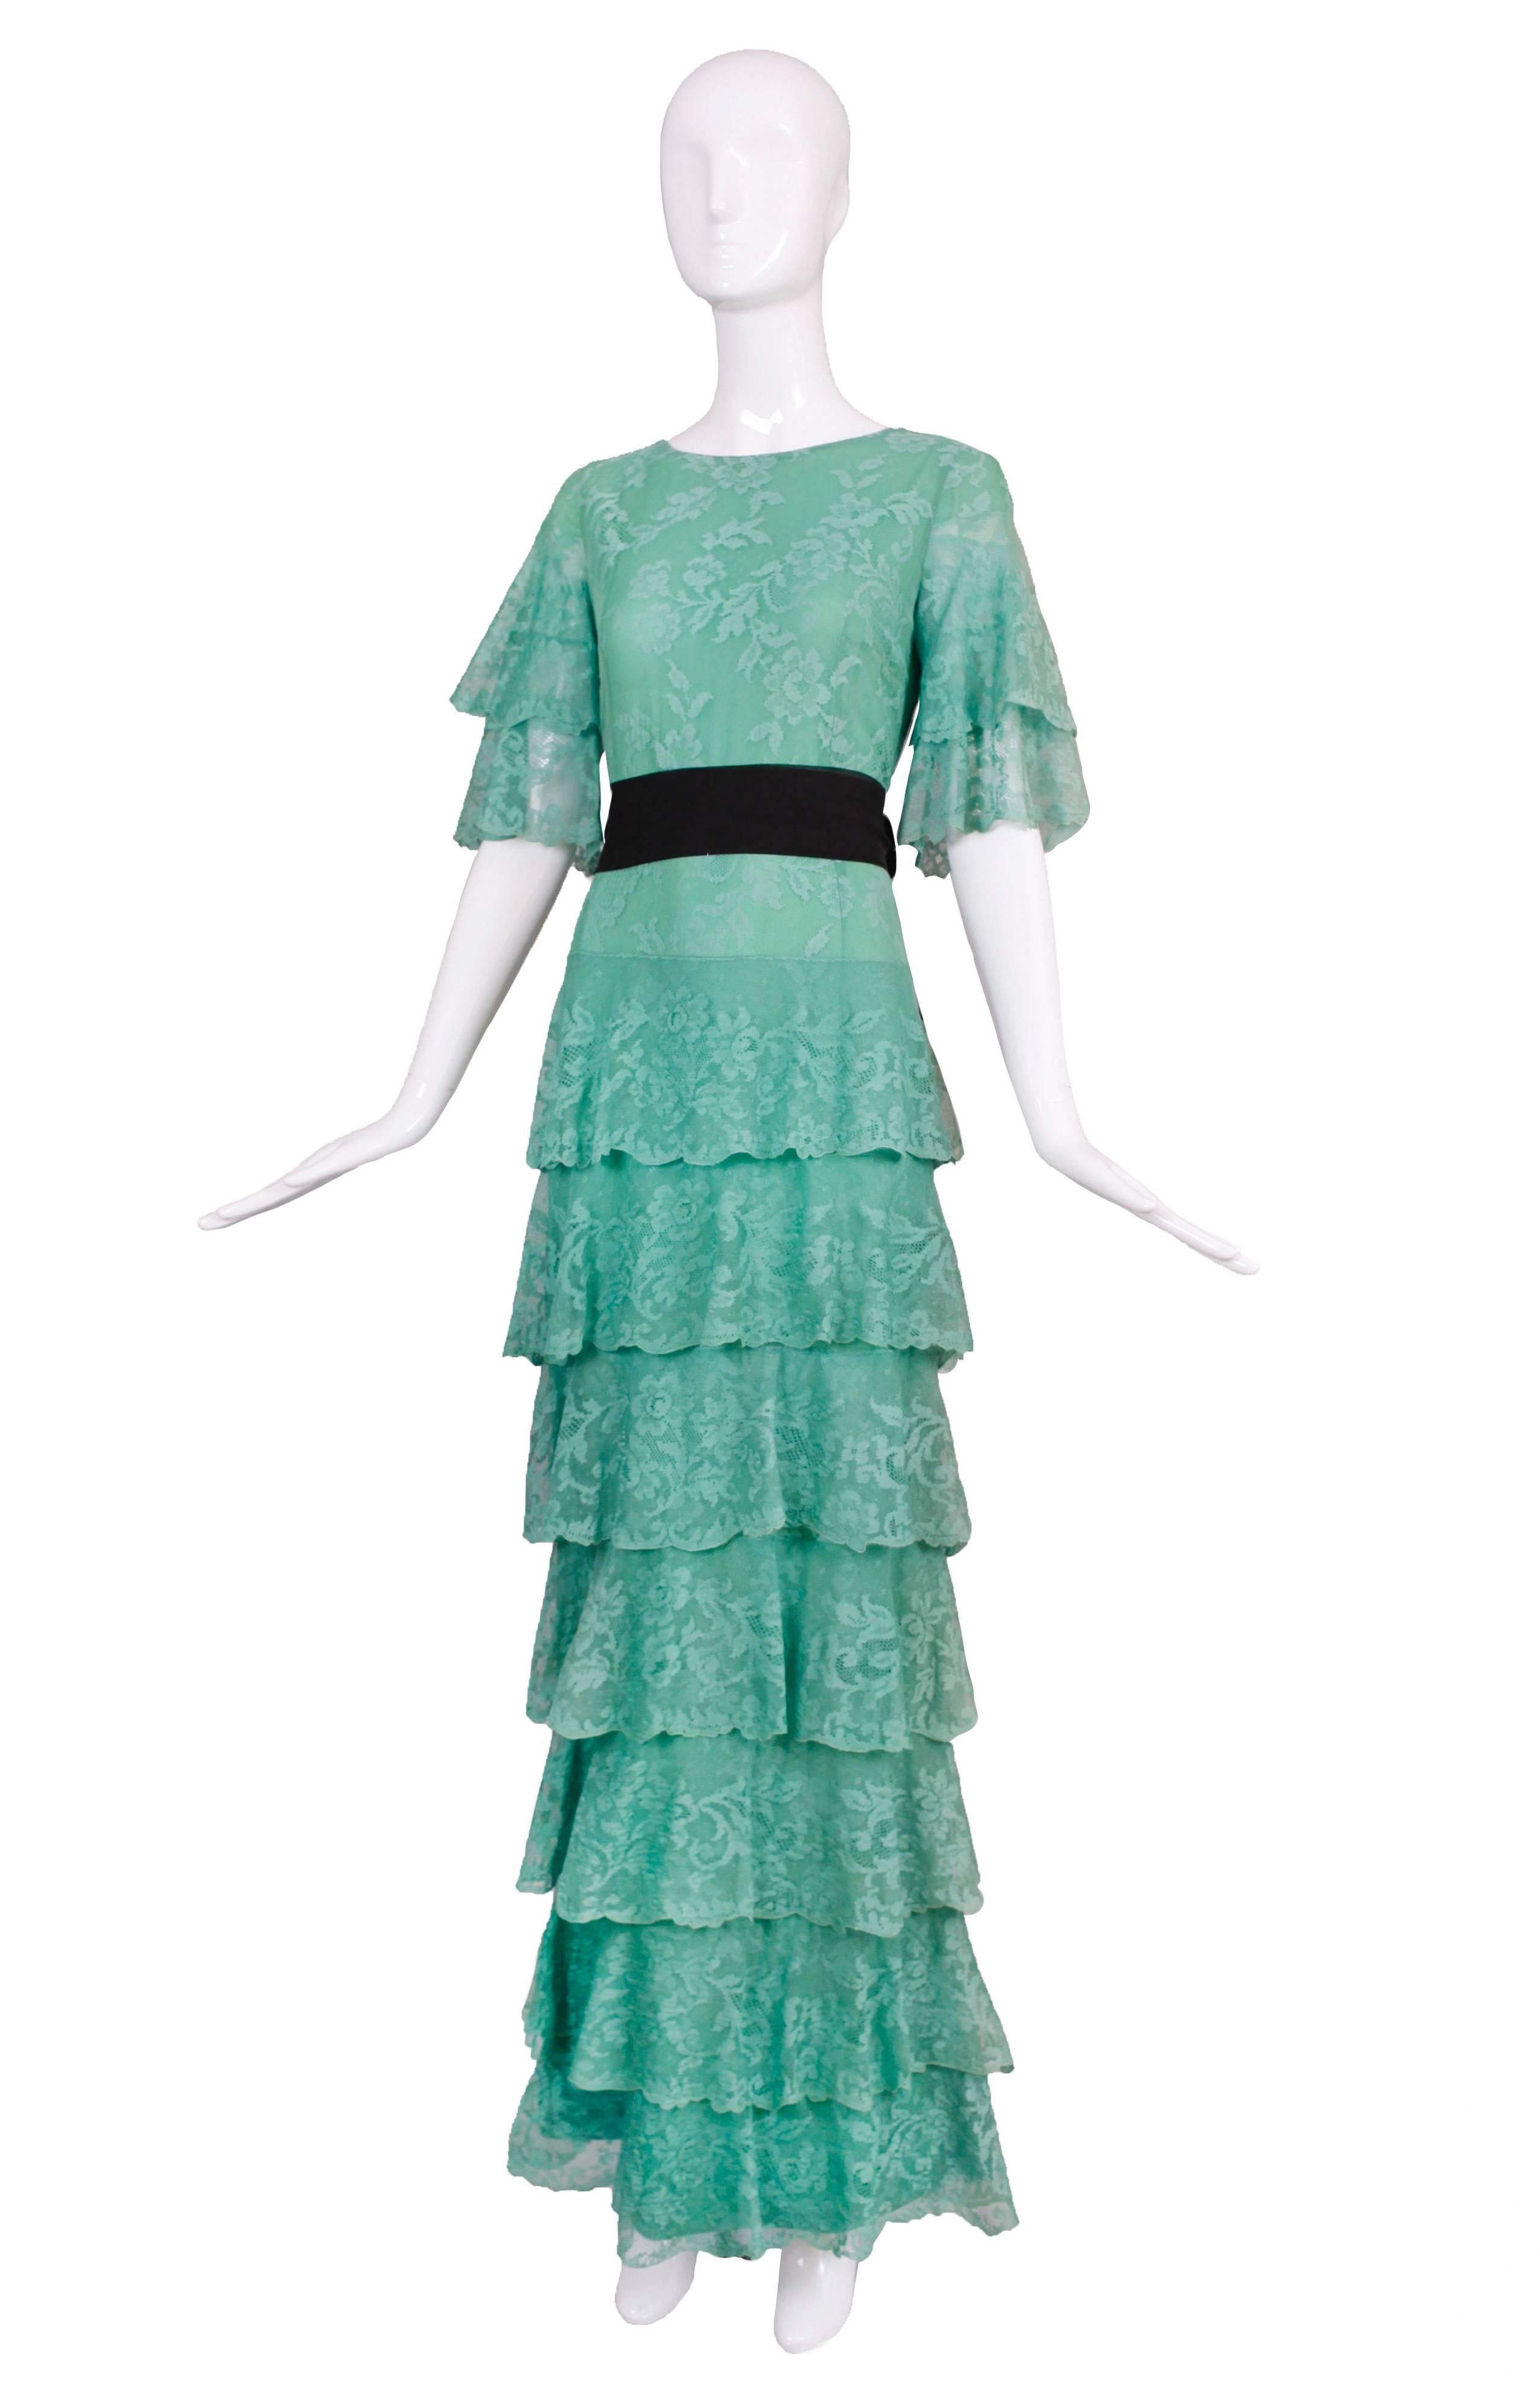 Pierre Cardin haute couture seafood green tiered lace evening gown. Lined at the interior with chiffon, does not come with belt. In excellent condition with a hidden rectangular mark at the interior bottom hem. No size tag so please consult